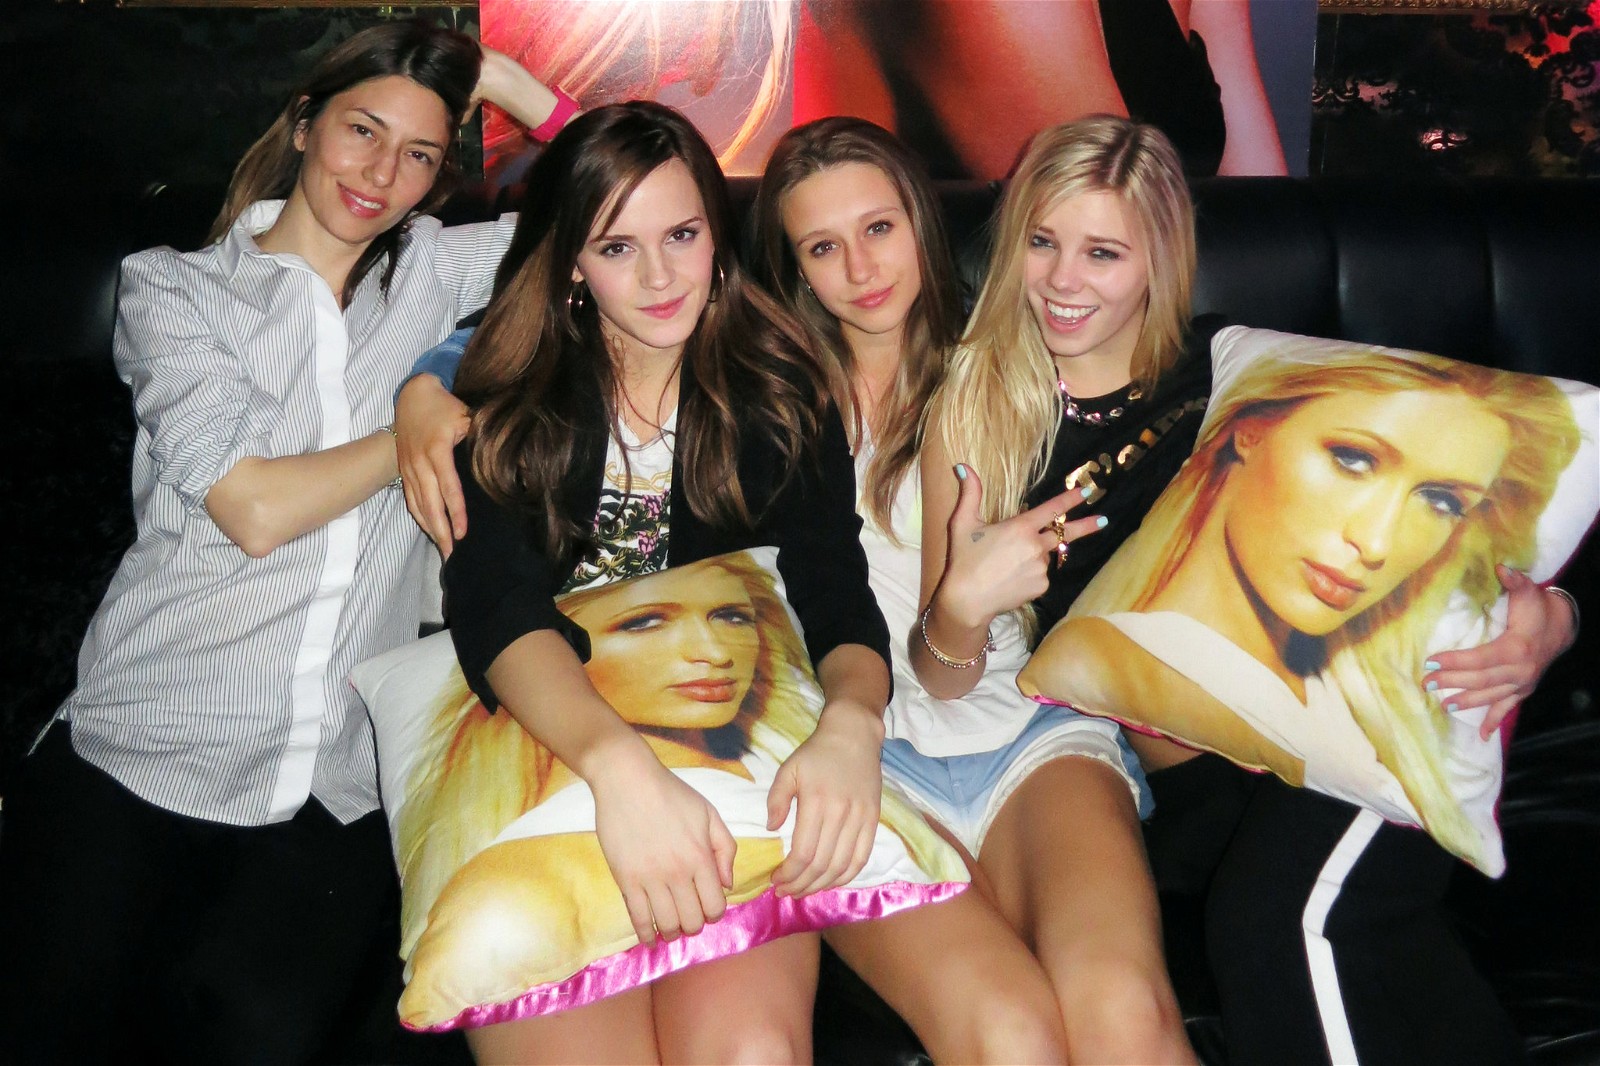 Cast members of The Bling Ring